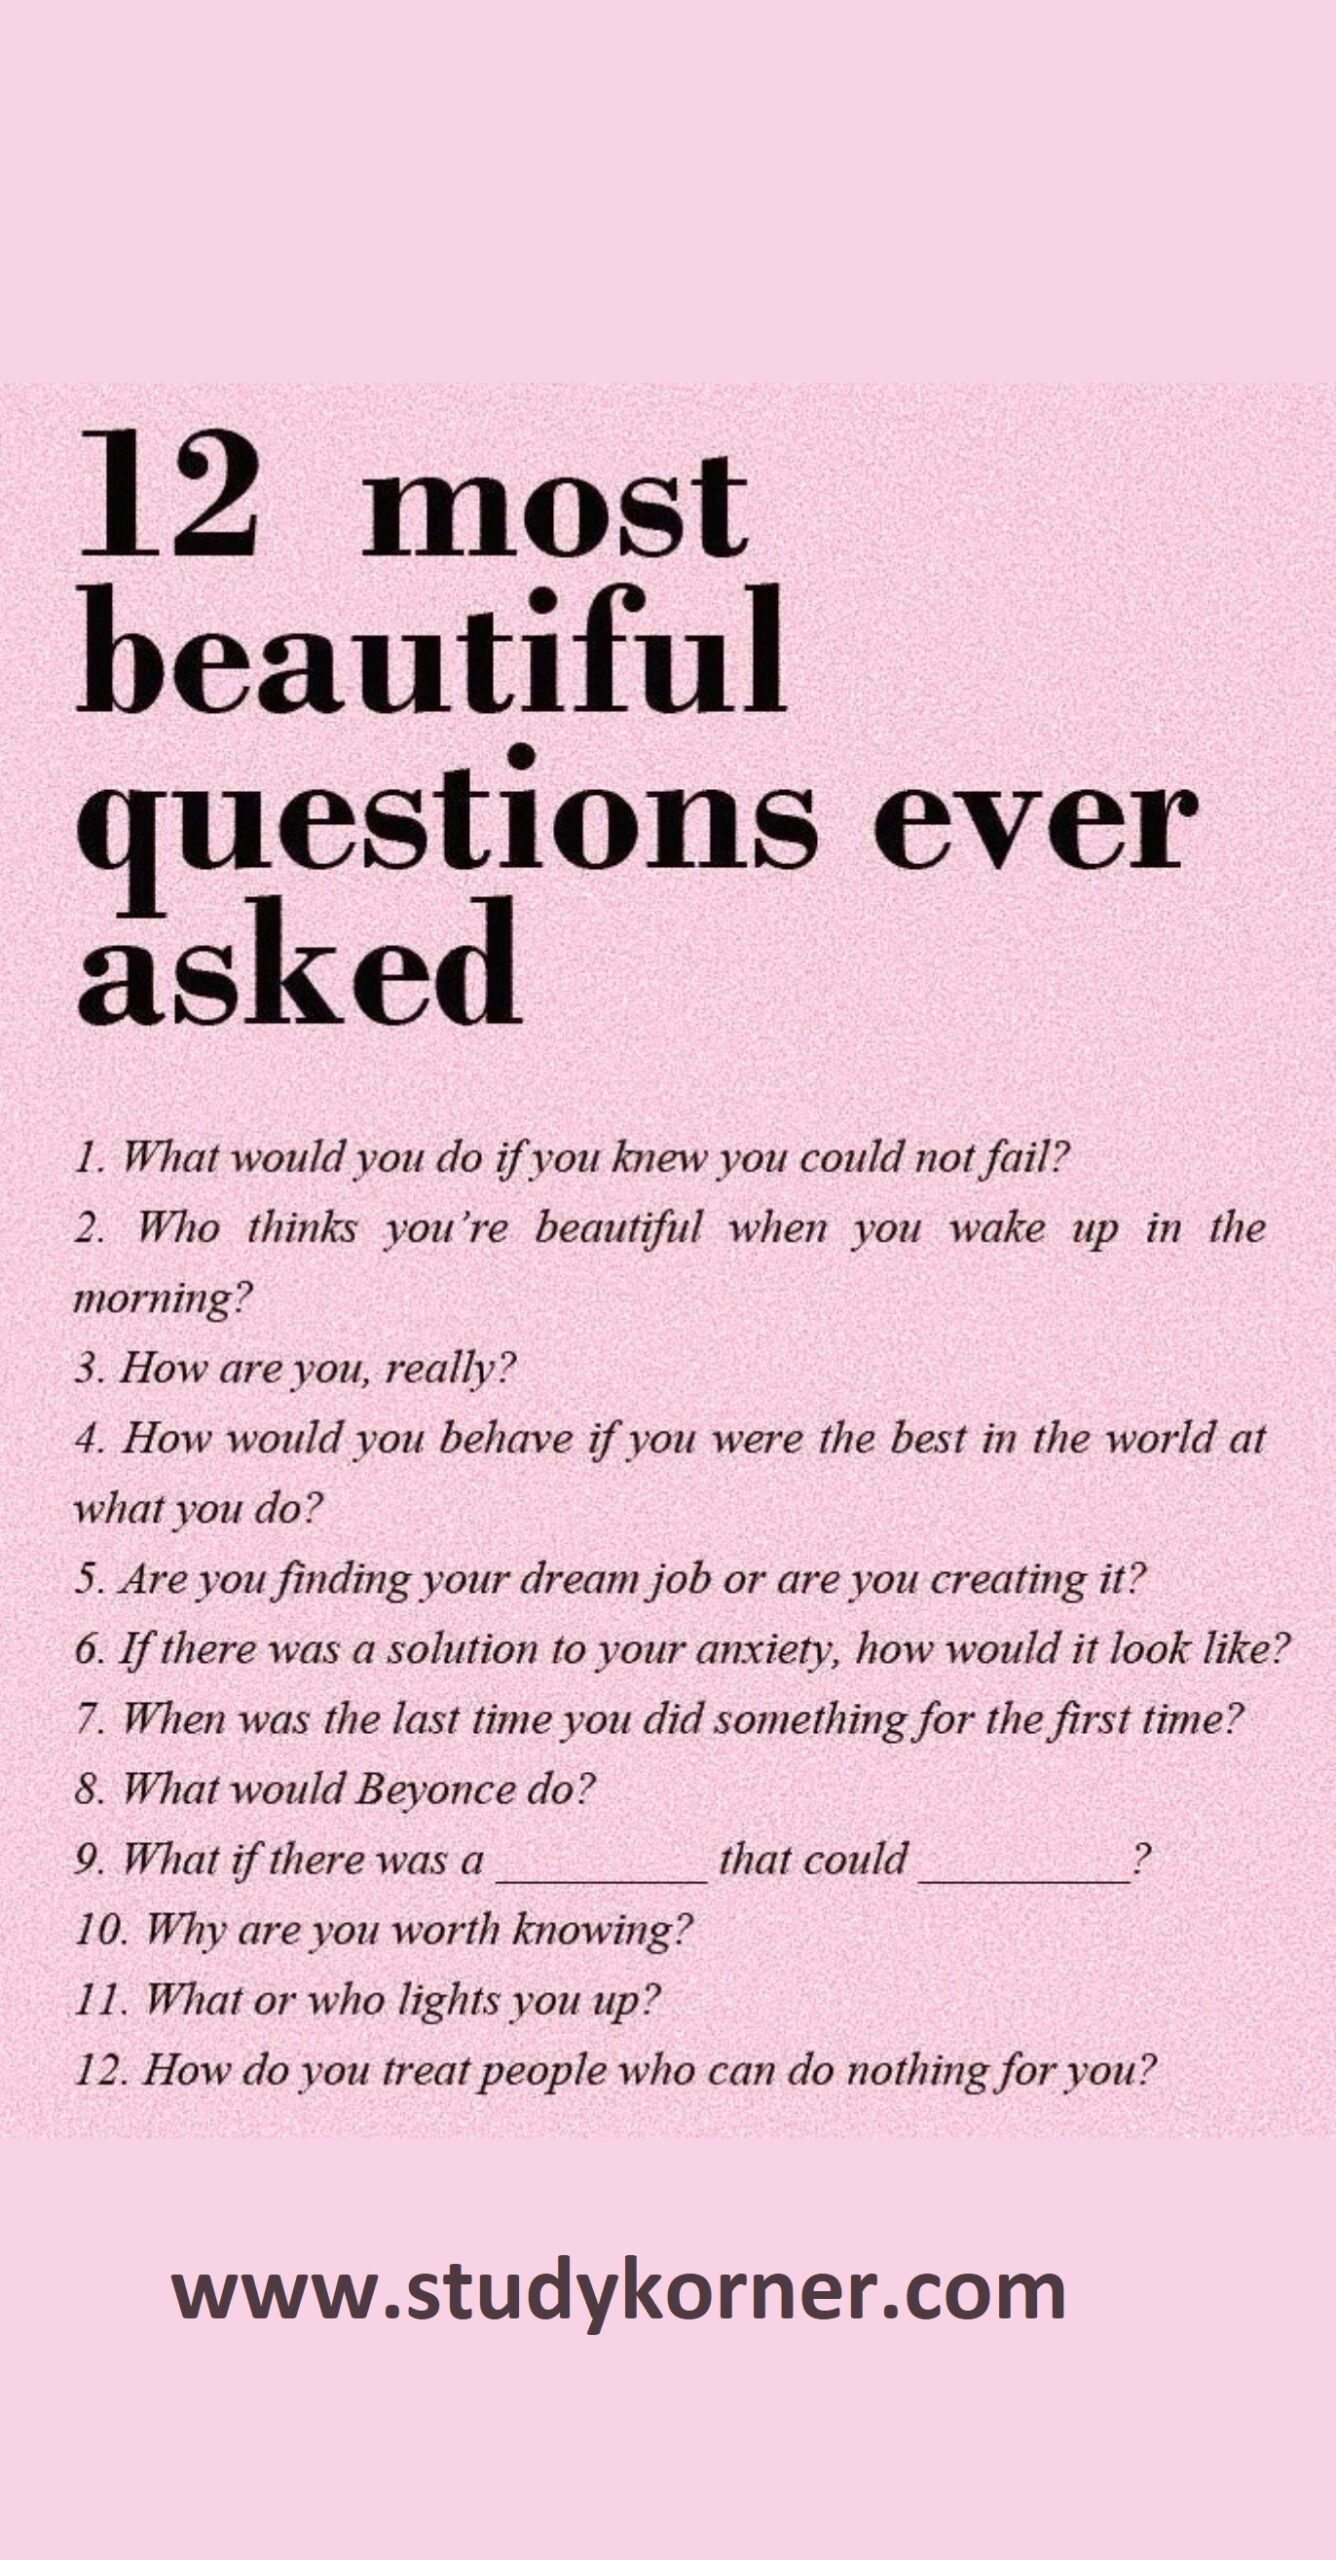 12 most beautiful questions ever asked